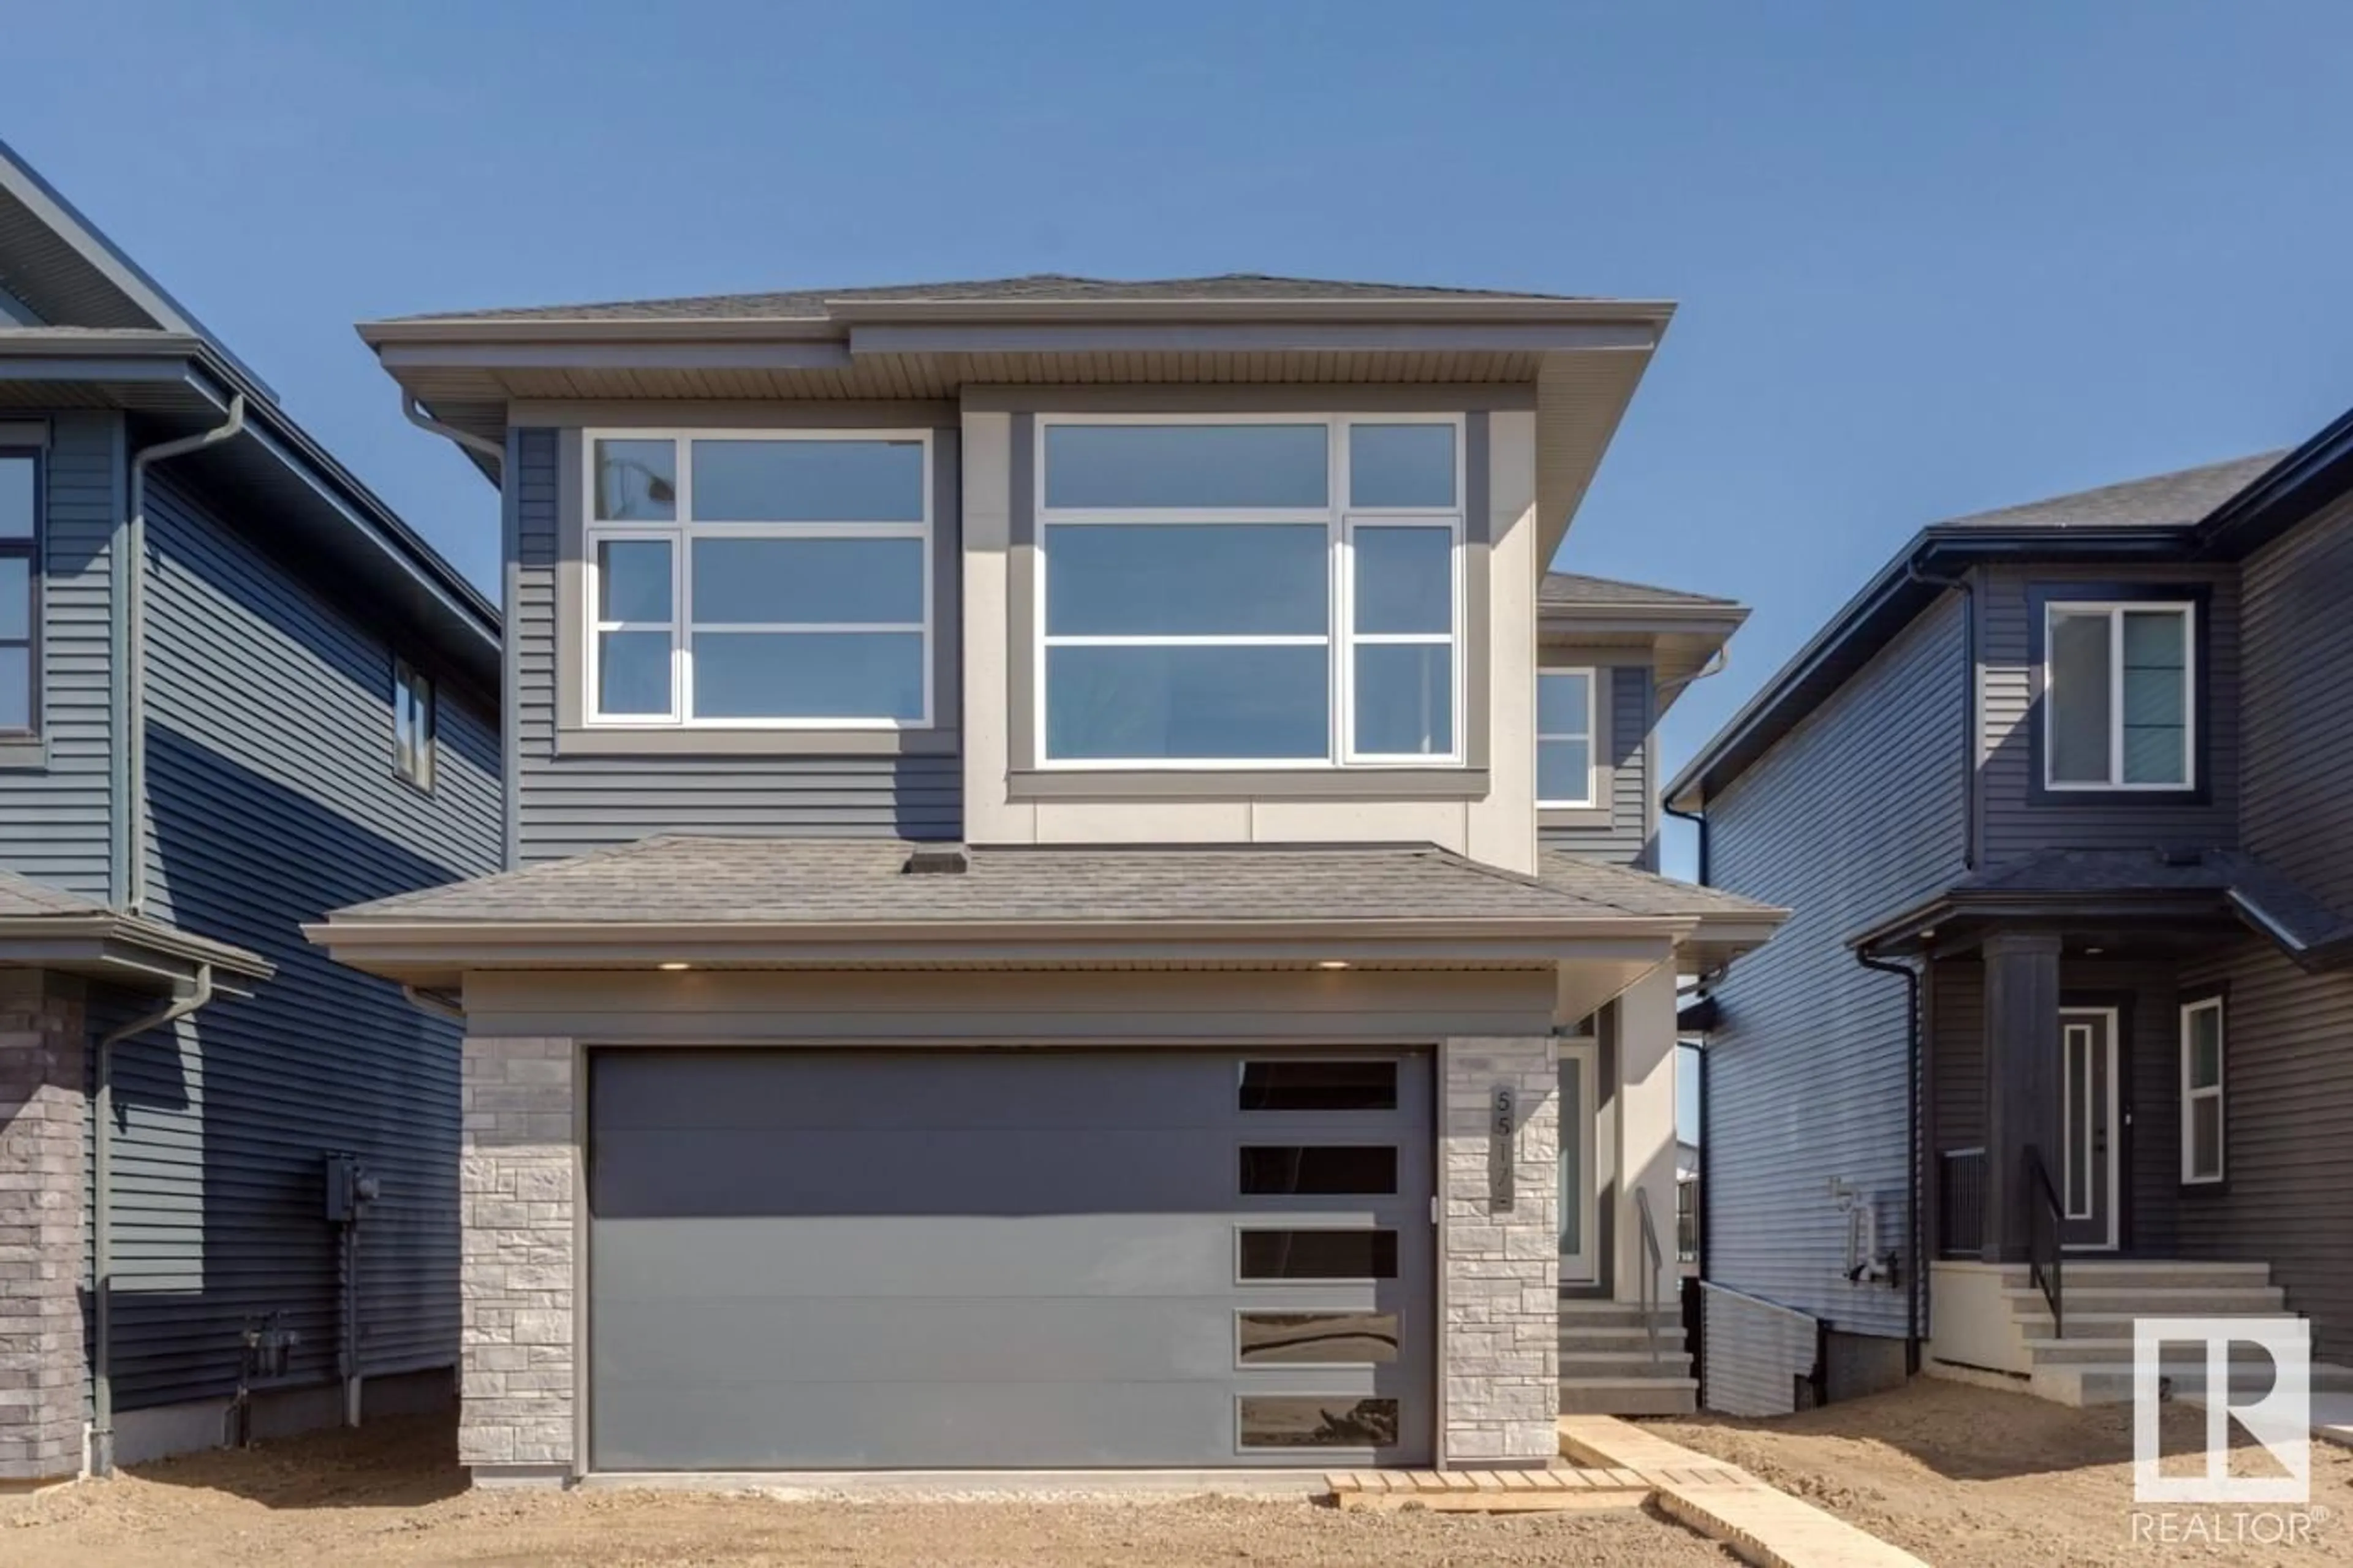 Home with vinyl exterior material for 5517 KOOTOOK RD SW, Edmonton Alberta T6W1A6